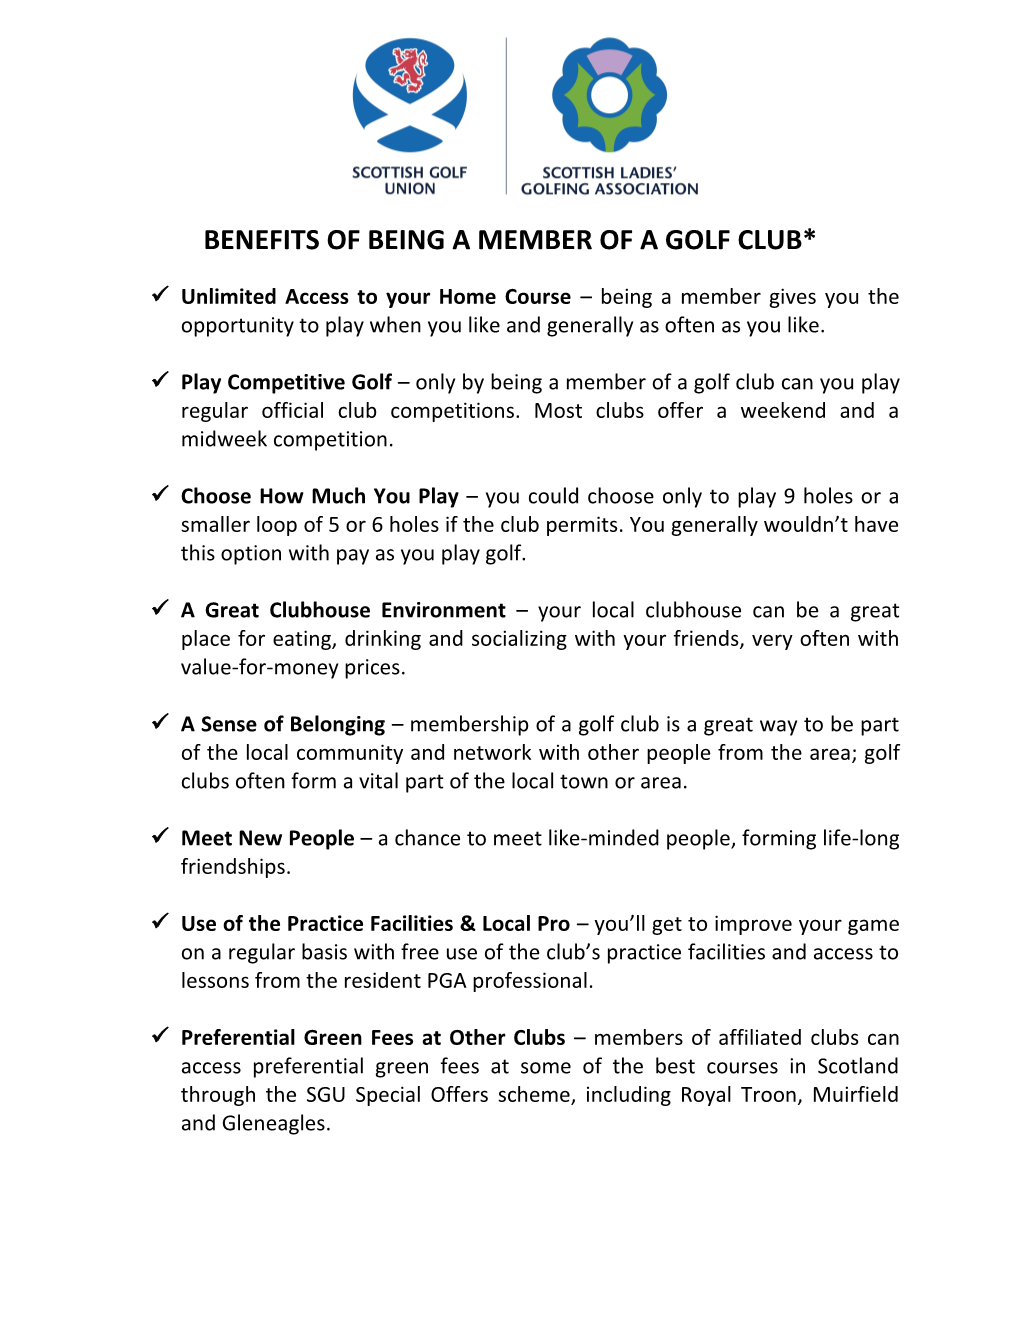 Benefits of Being a Member of a Golf Club*